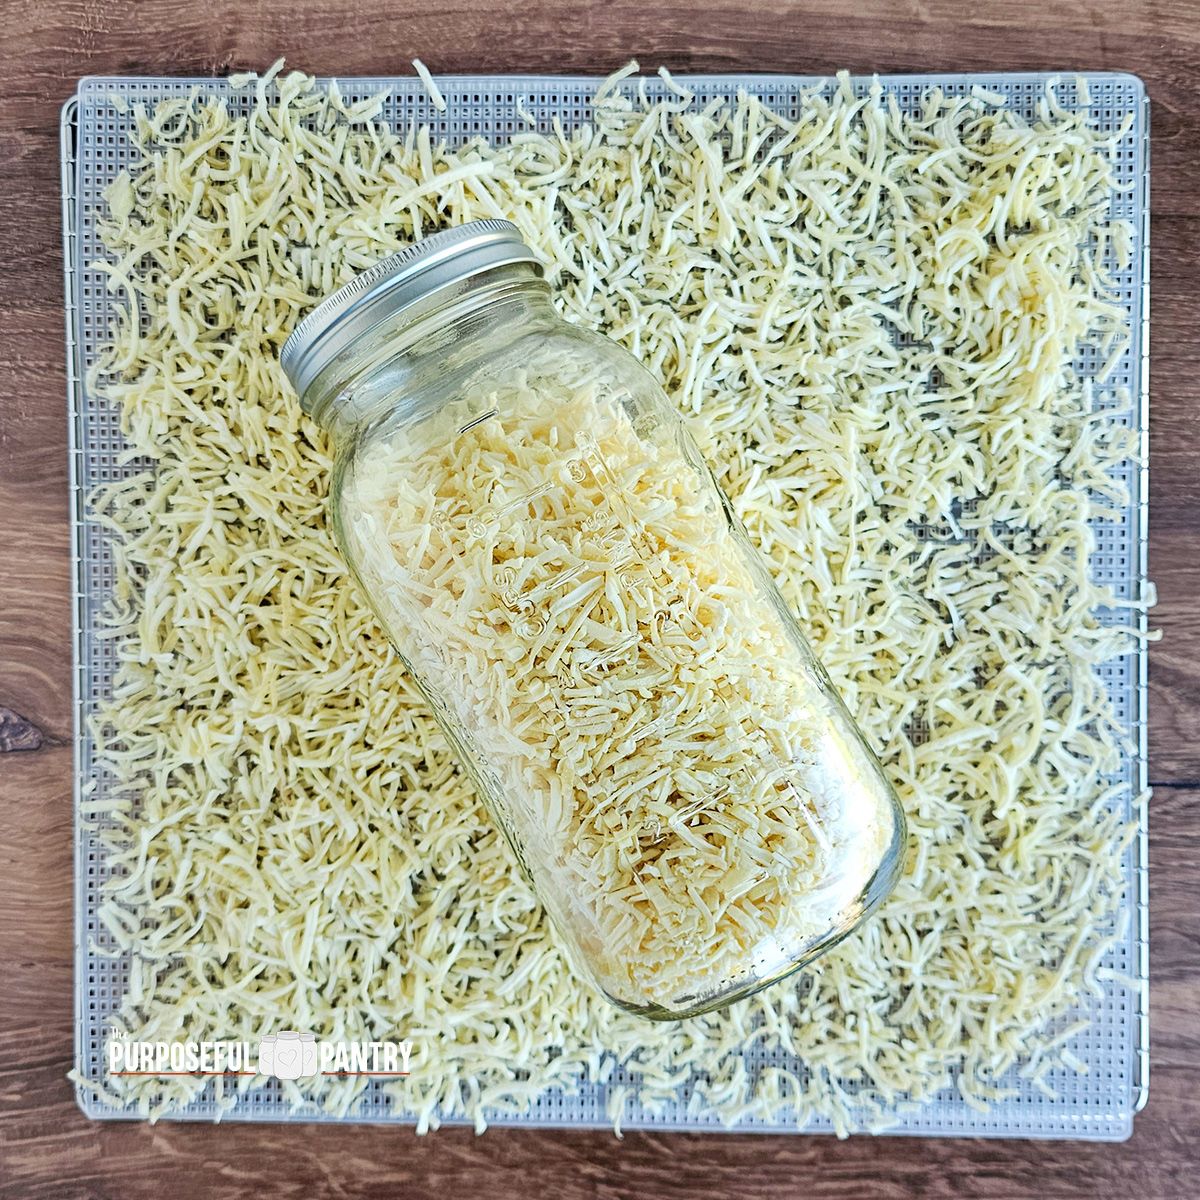 Dehydrate Hash Browns - The Purposeful Pantry